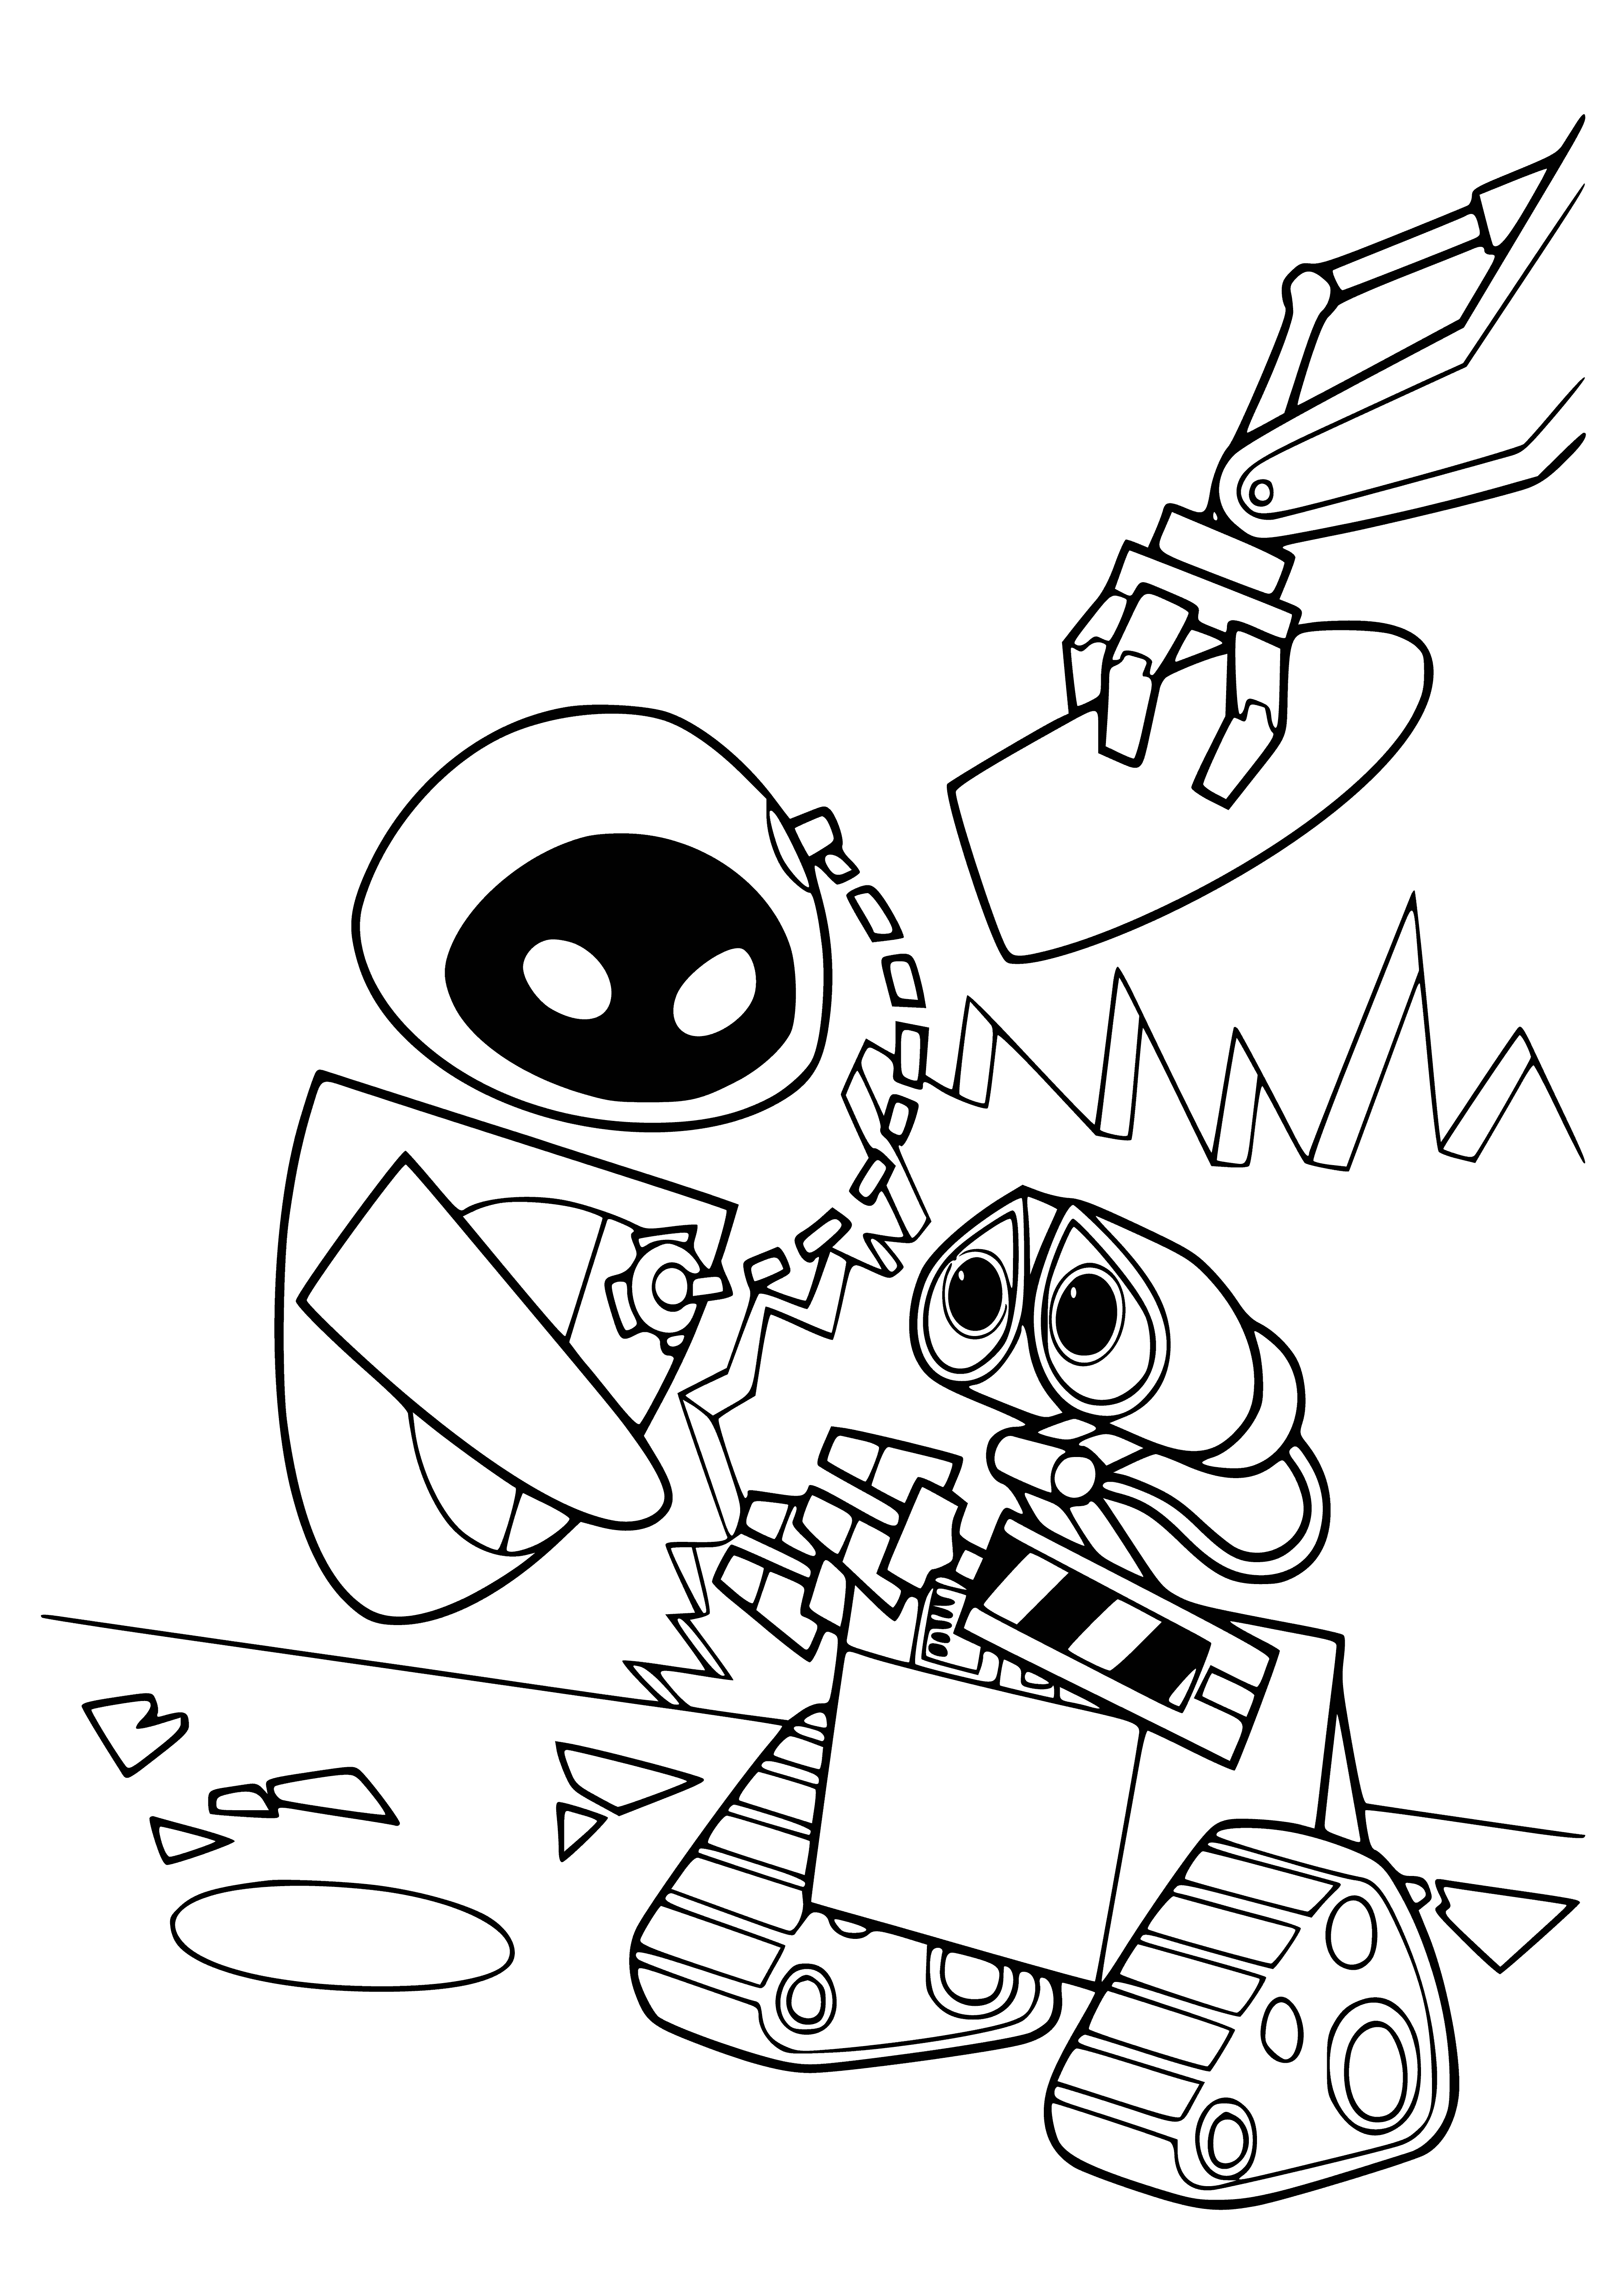 coloring page: Wall-e and Eve explore a world of organic splendor, discovering love and friendship as they journey.